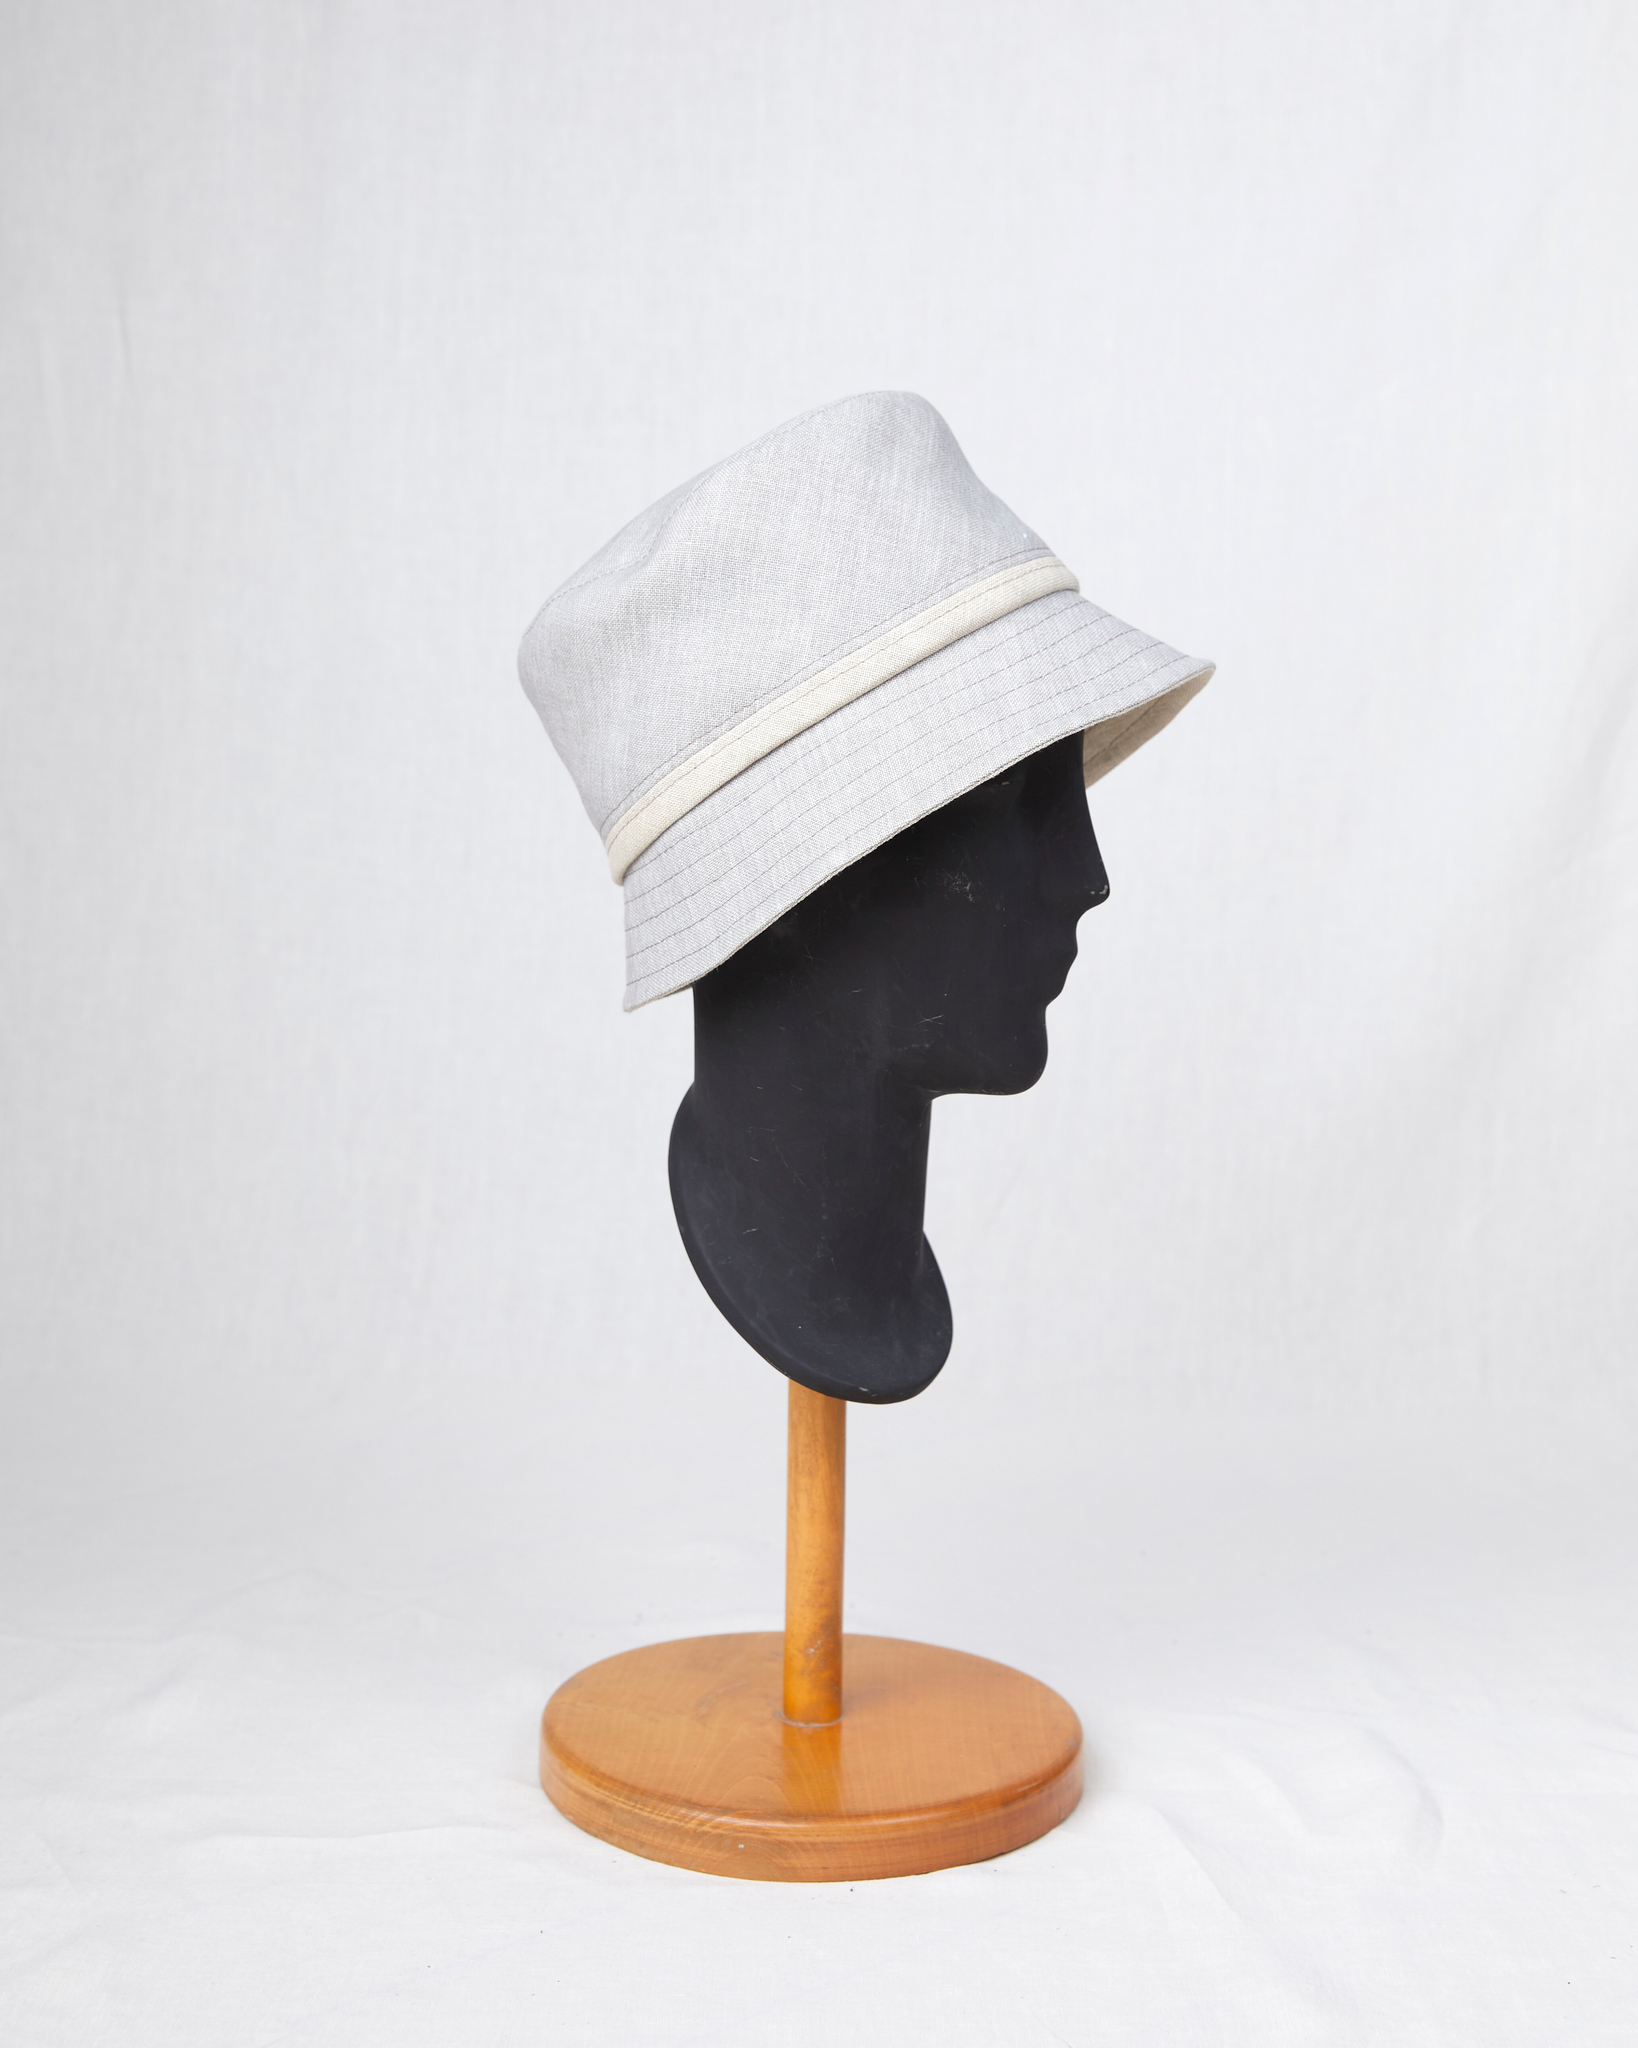 HEADQUARTER | couture headwear Bucket hat made of double face linen. Designed and handcrafted in Switzerland.